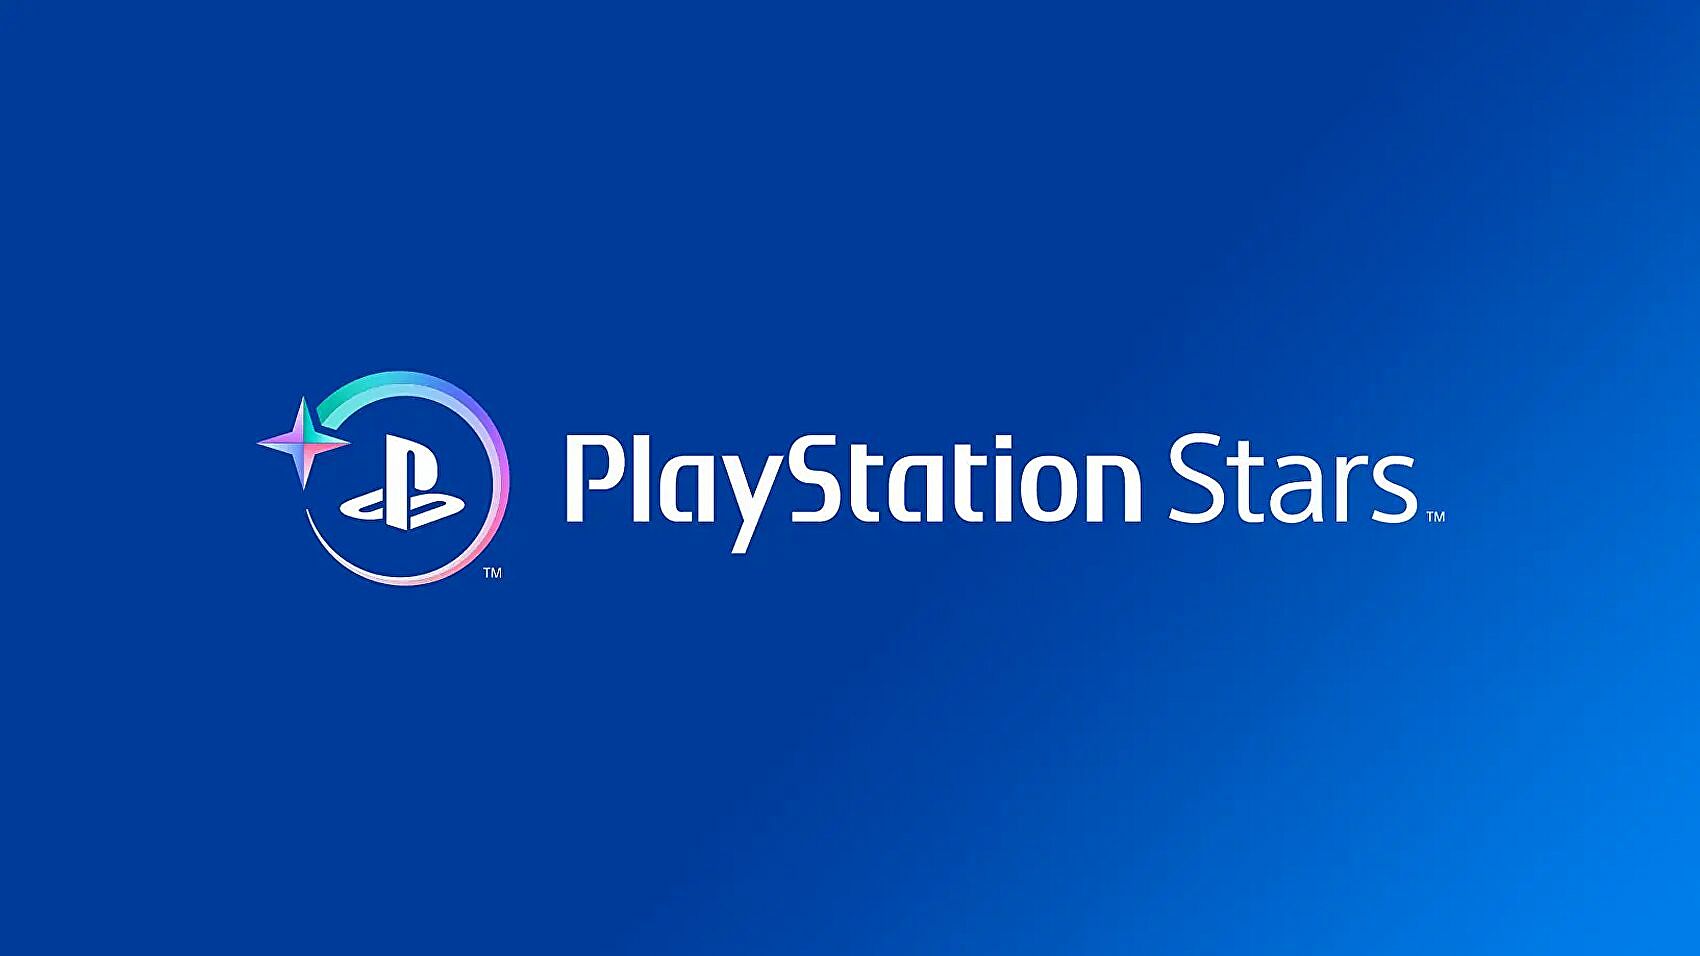 PlayStation Stars loyalty program launches in Europe and North America in October